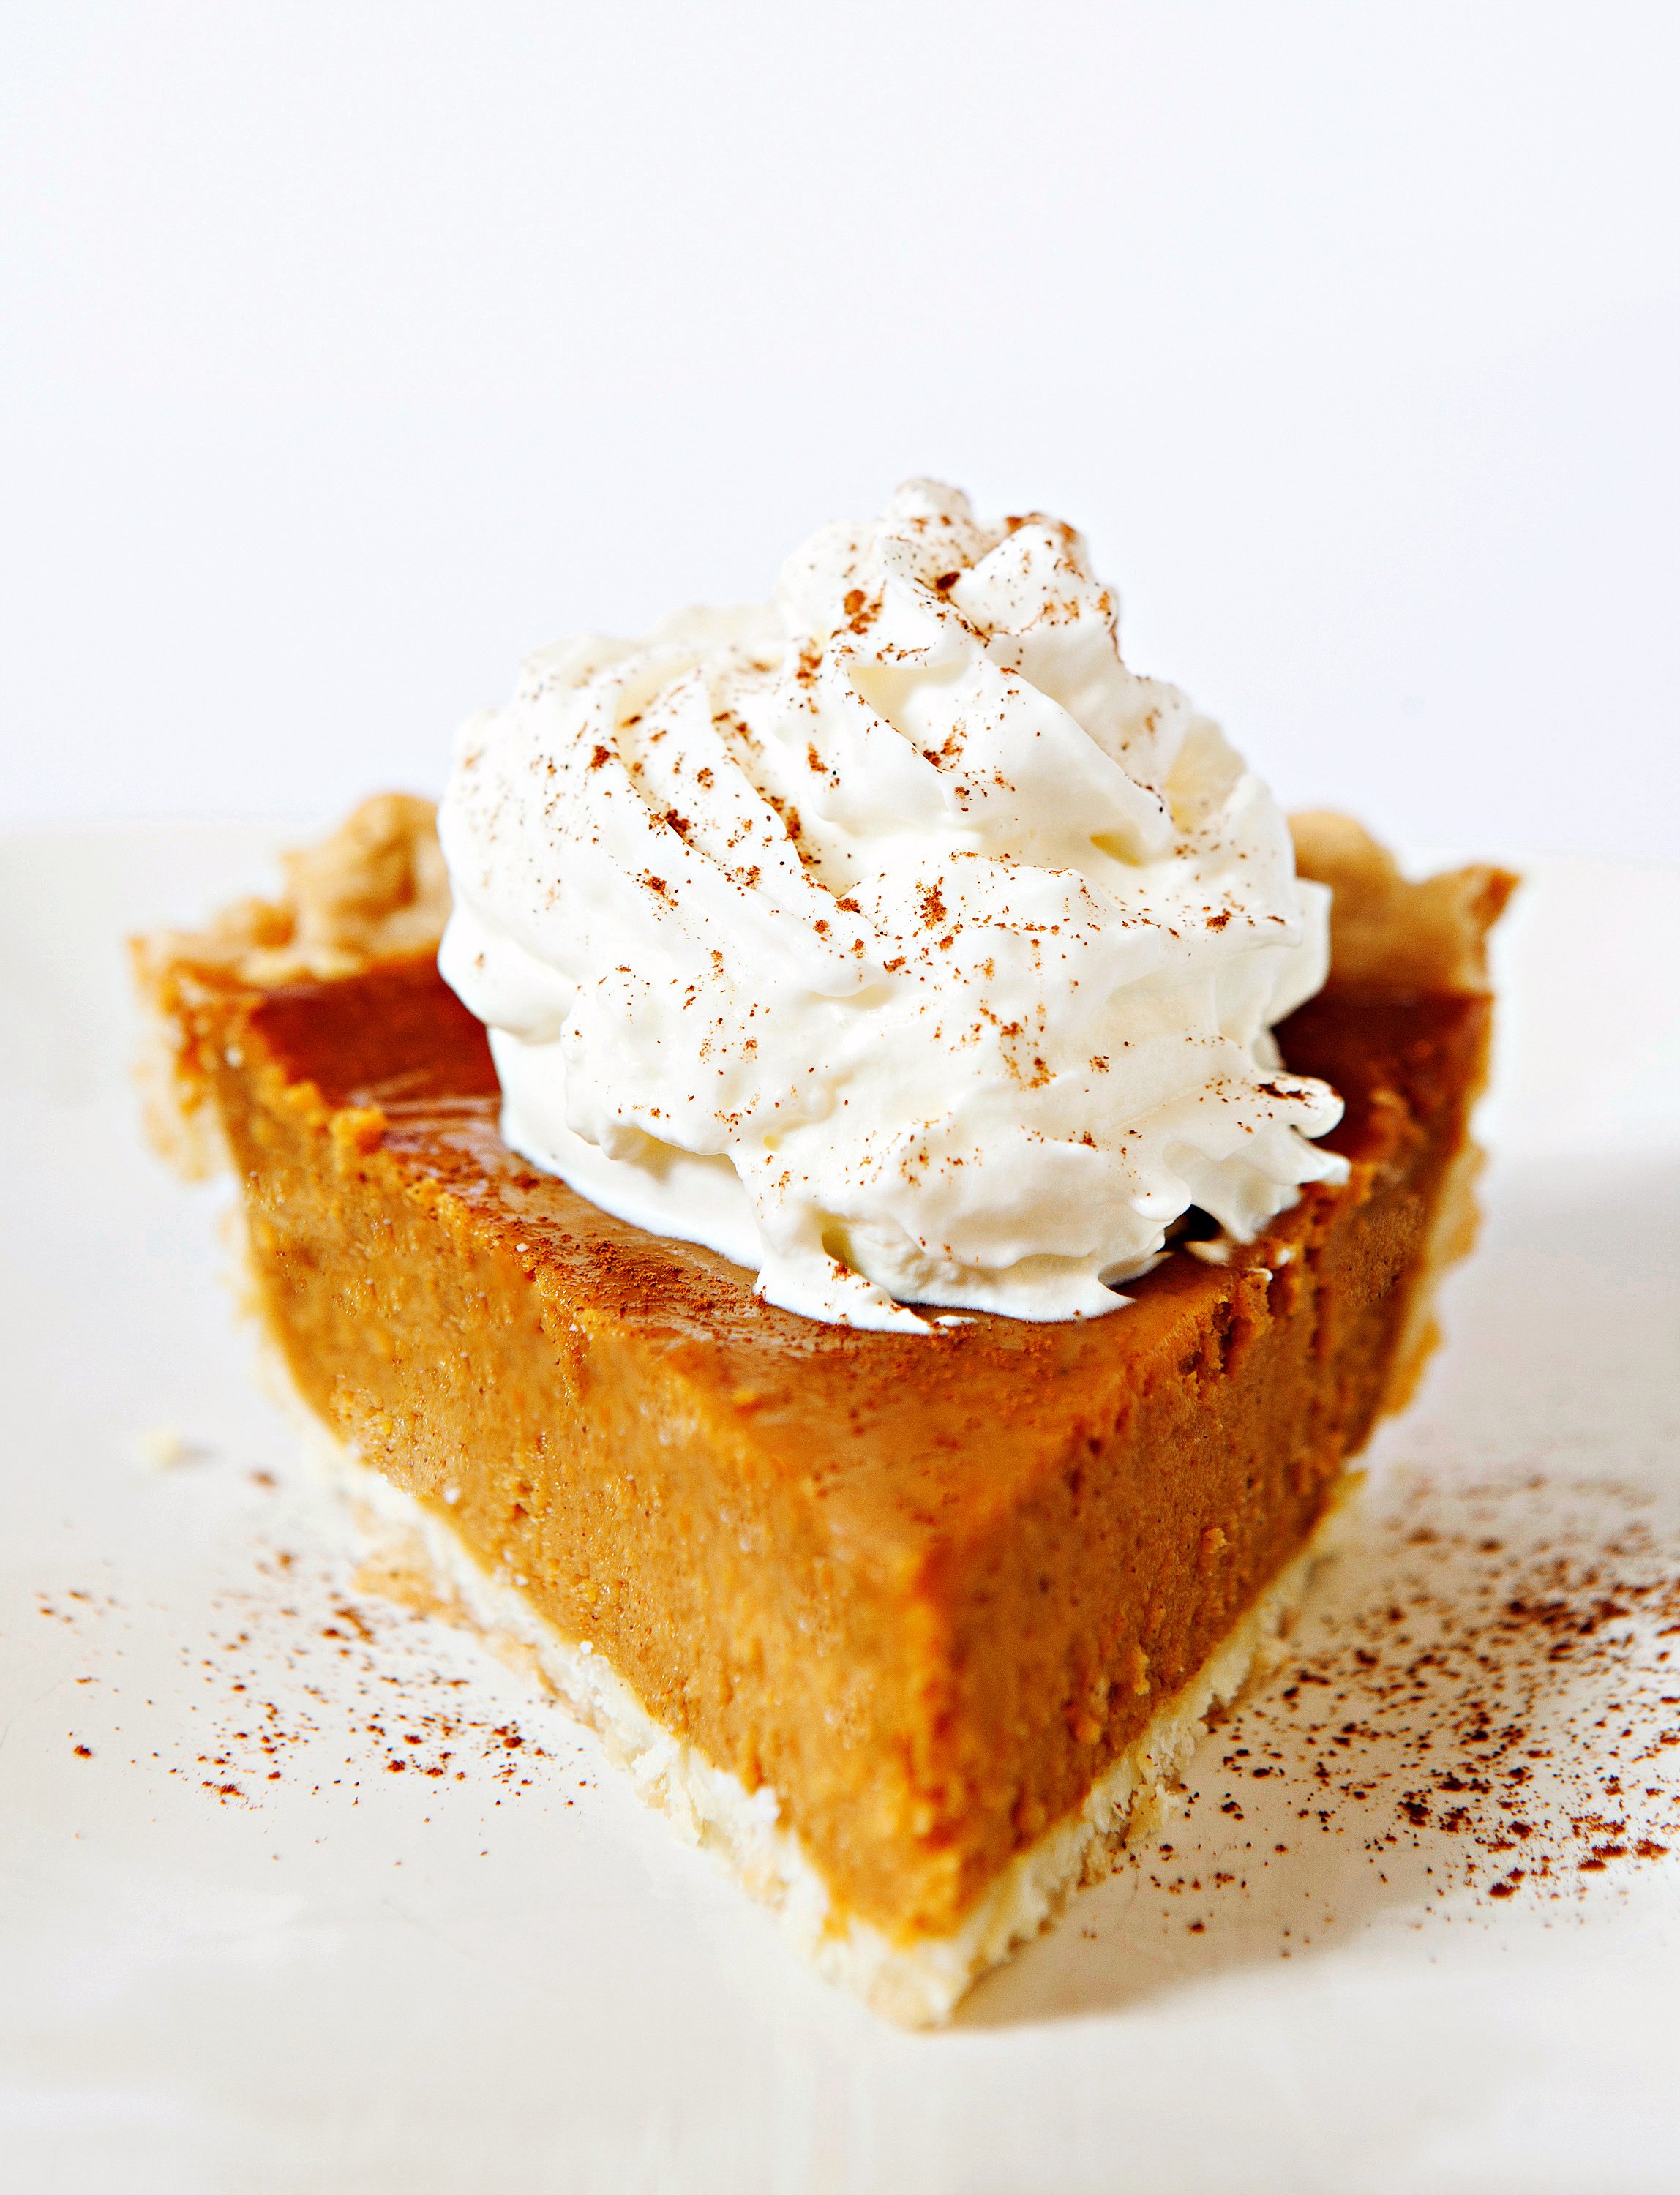 Vegan Thanksgiving Pumpkin Pie - The iconic, quintessential pie of Thanksgiving! Rich, creamy, and loaded with spices of the season. Easy & comforting - a family favorite year after year! via @thiswifecooks